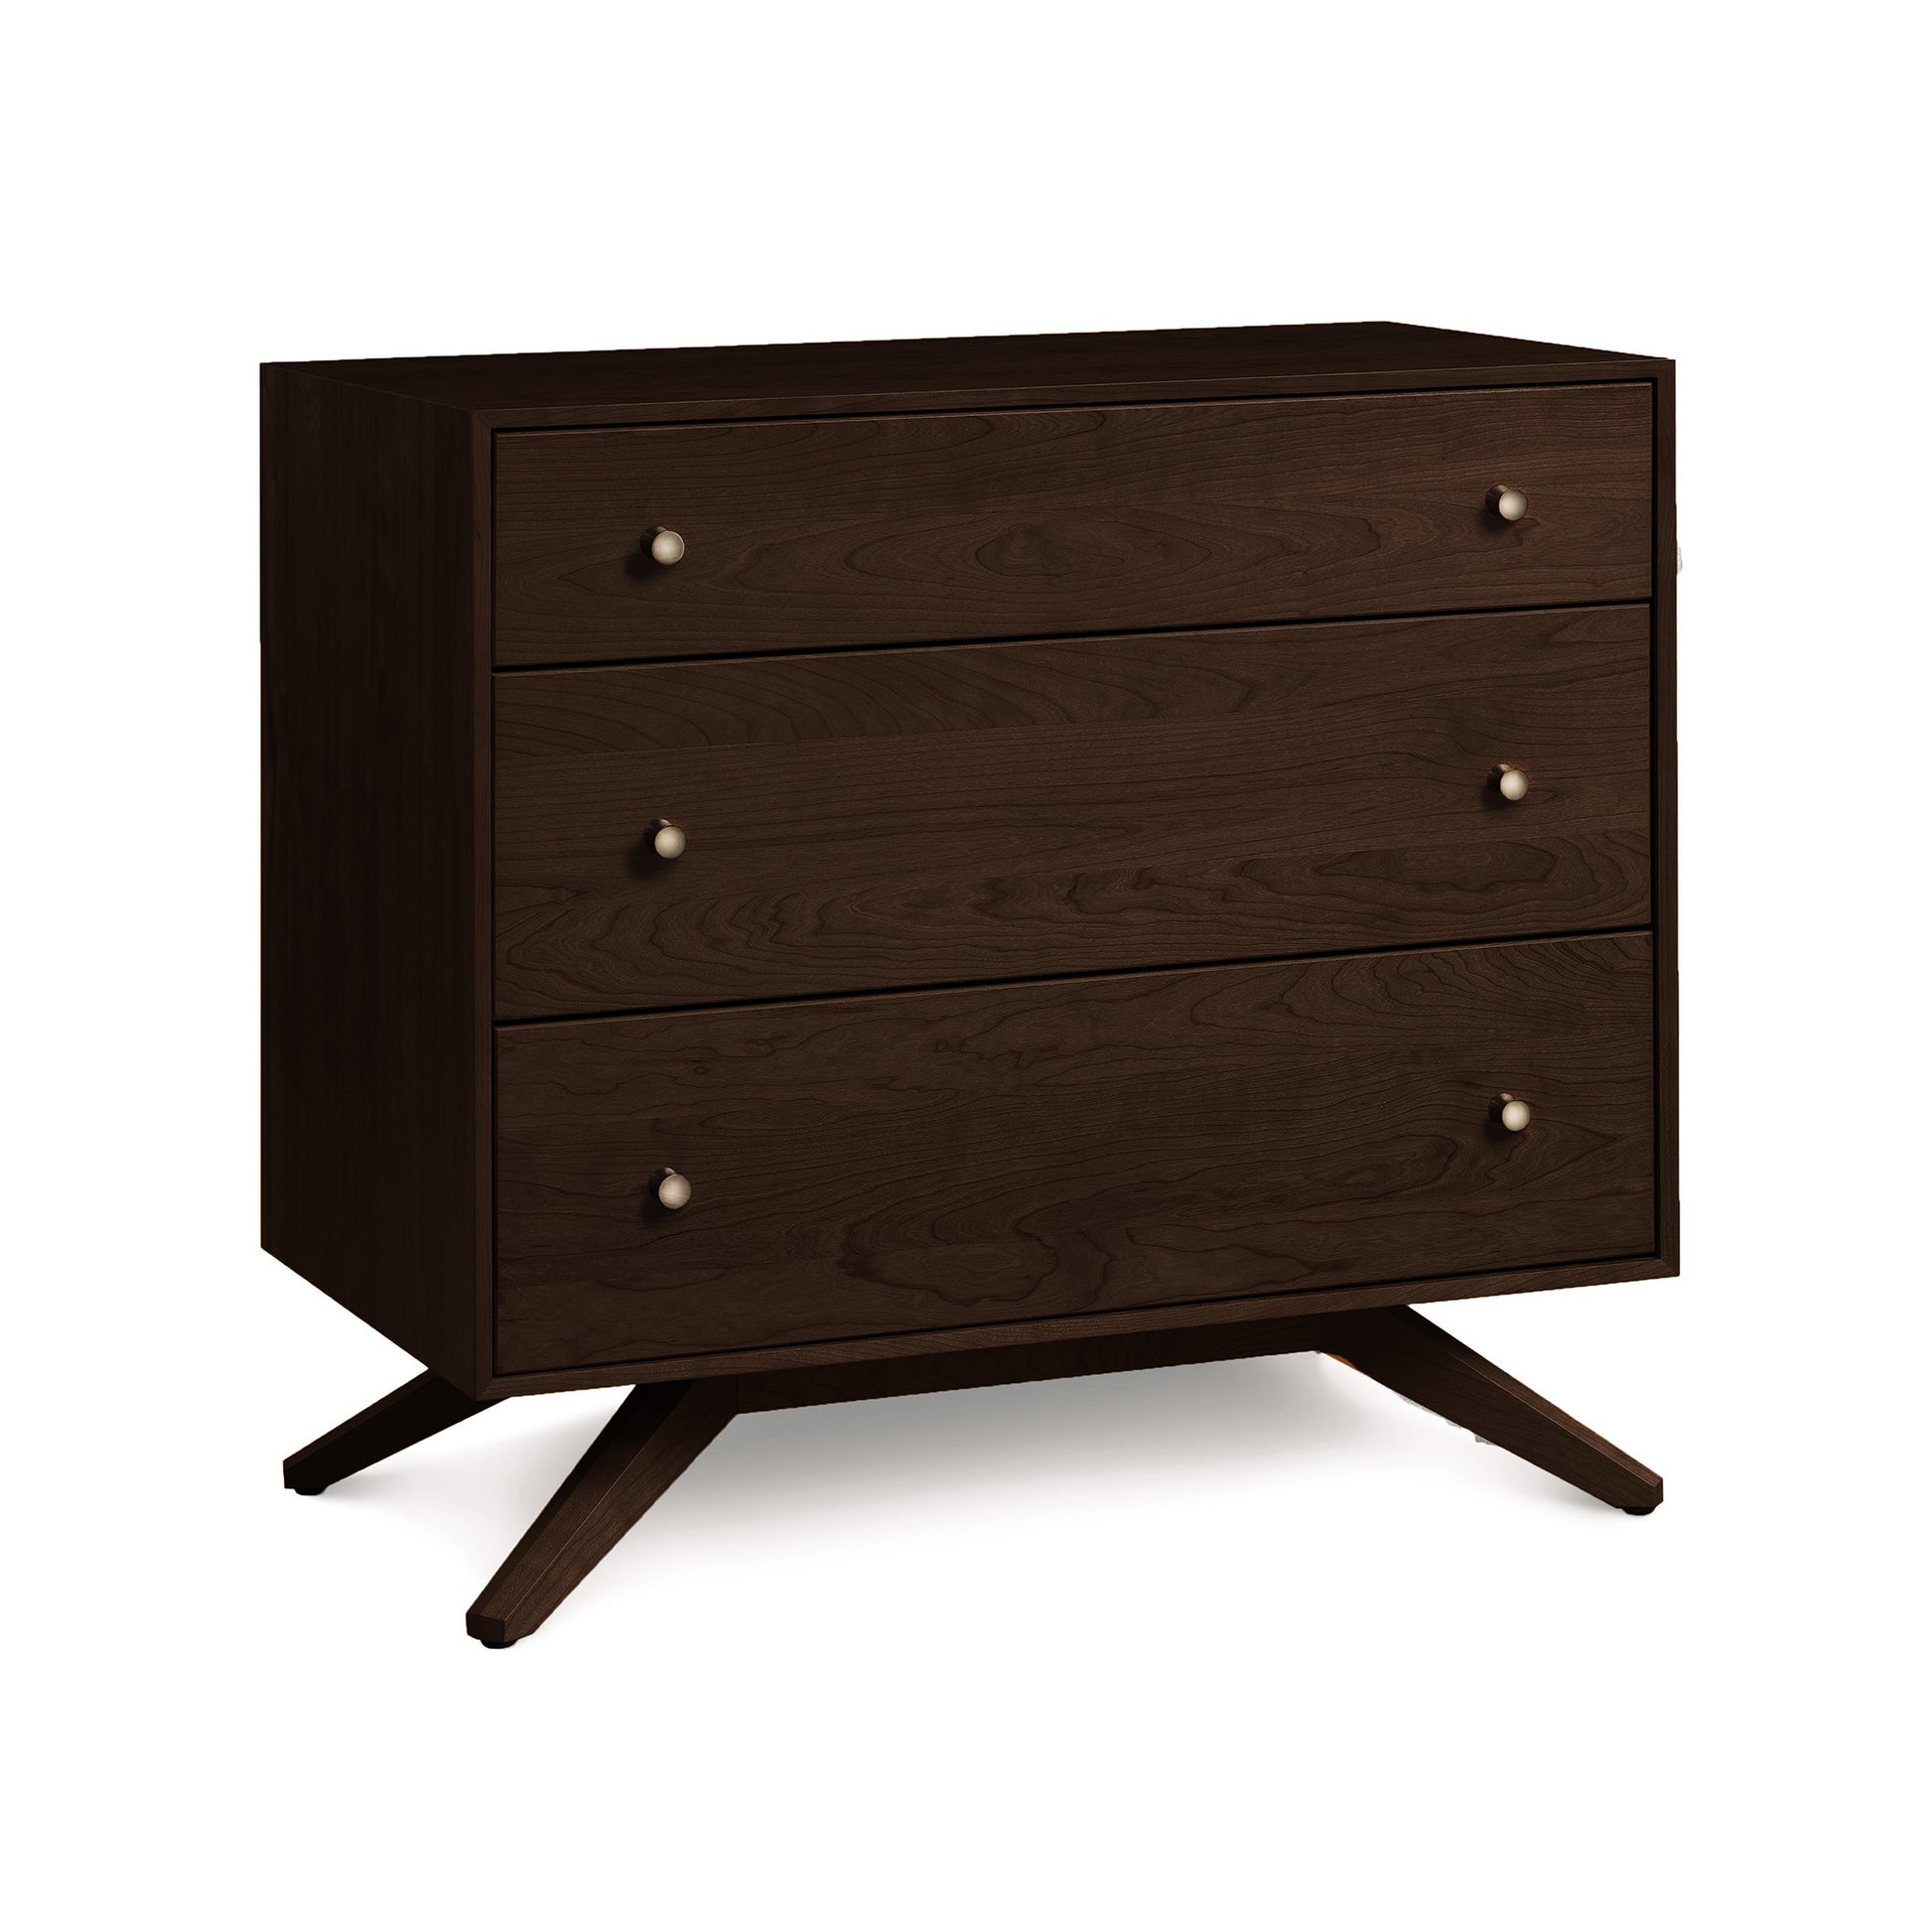 A Copeland Furniture Astrid 3-Drawer Chest, mid-century modern style with angled legs.